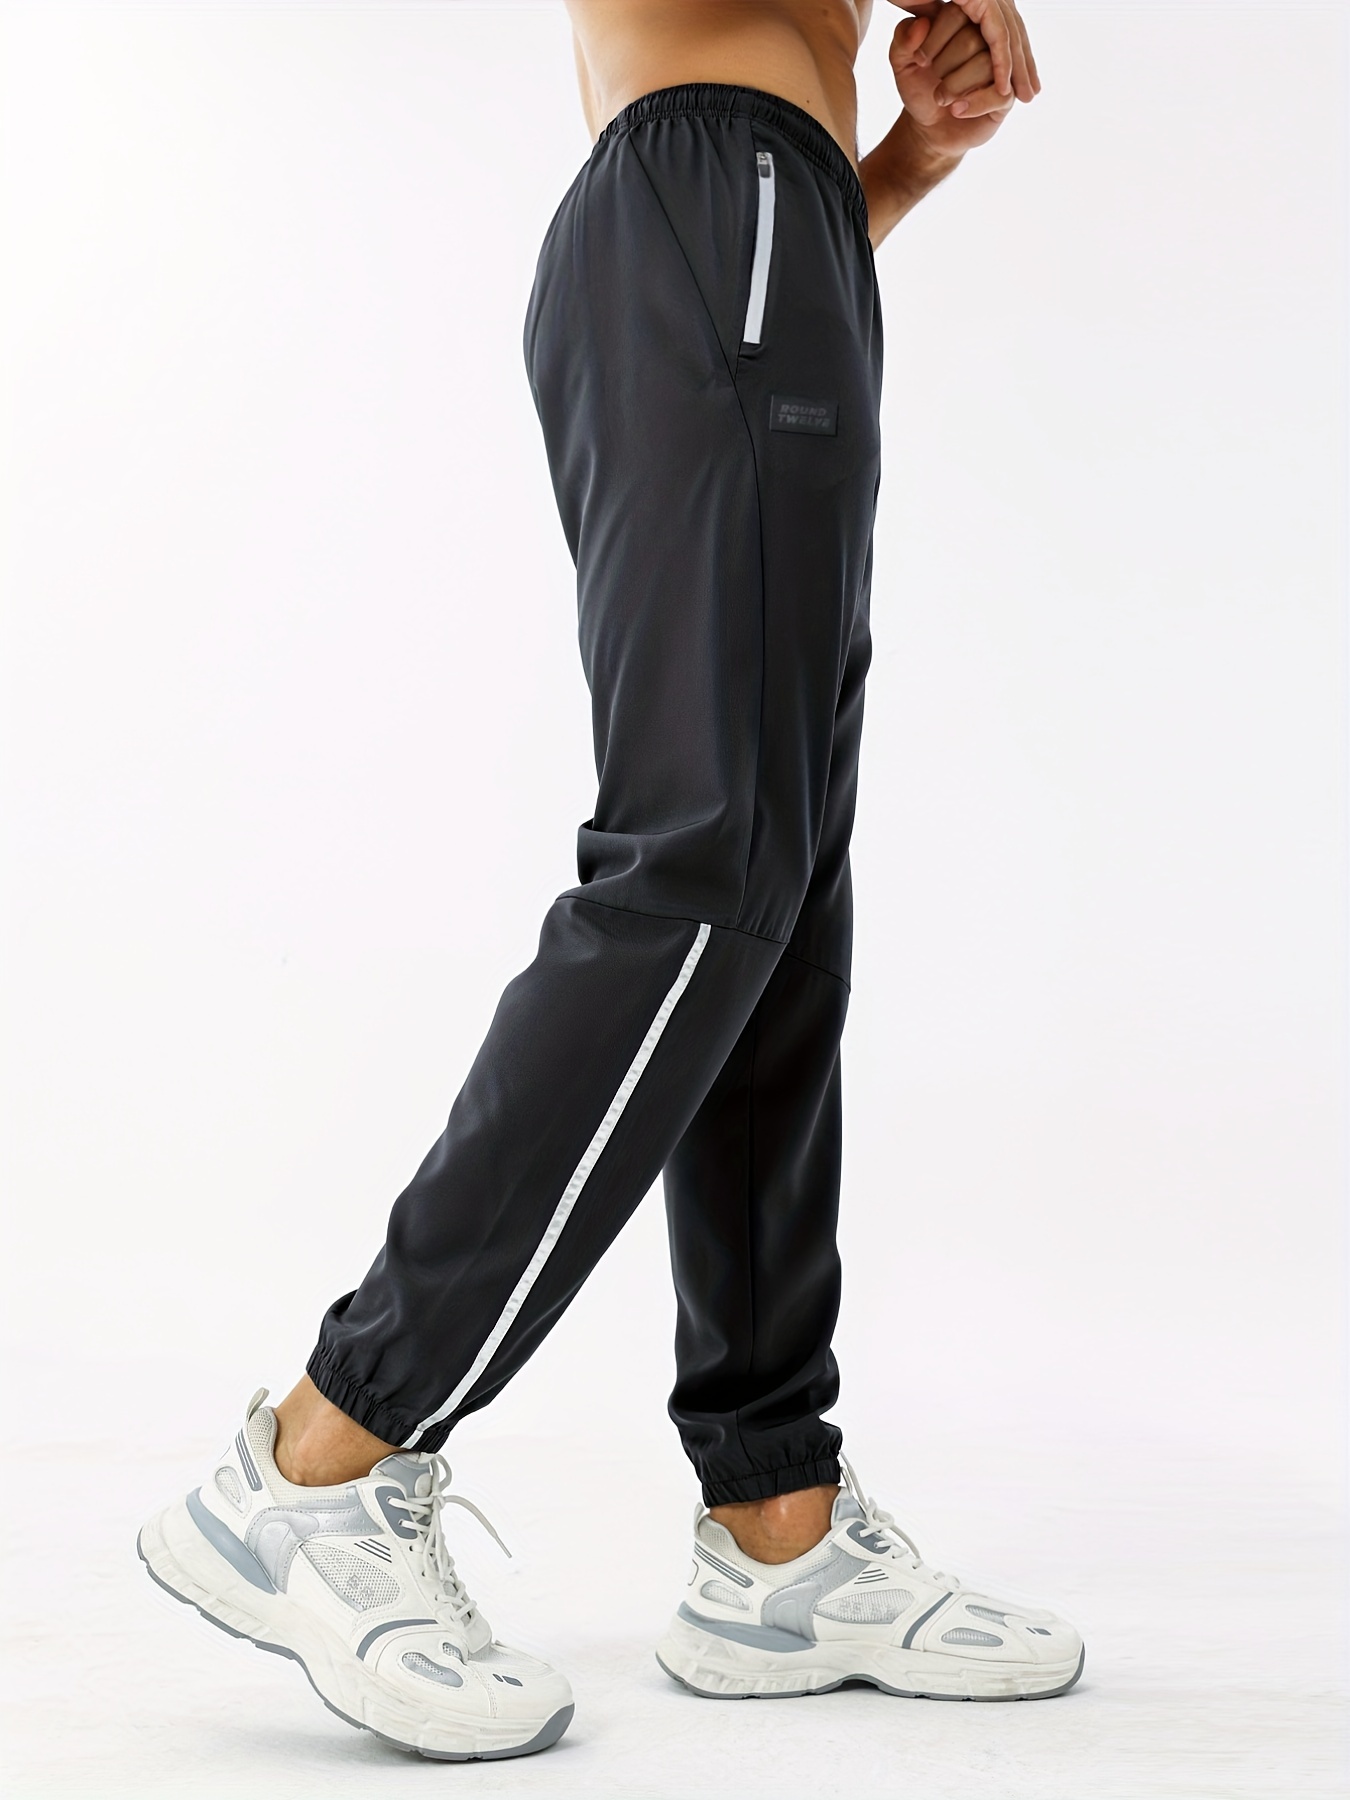 Kids / young adult track pants from decathlon. 37 inches long . Navy